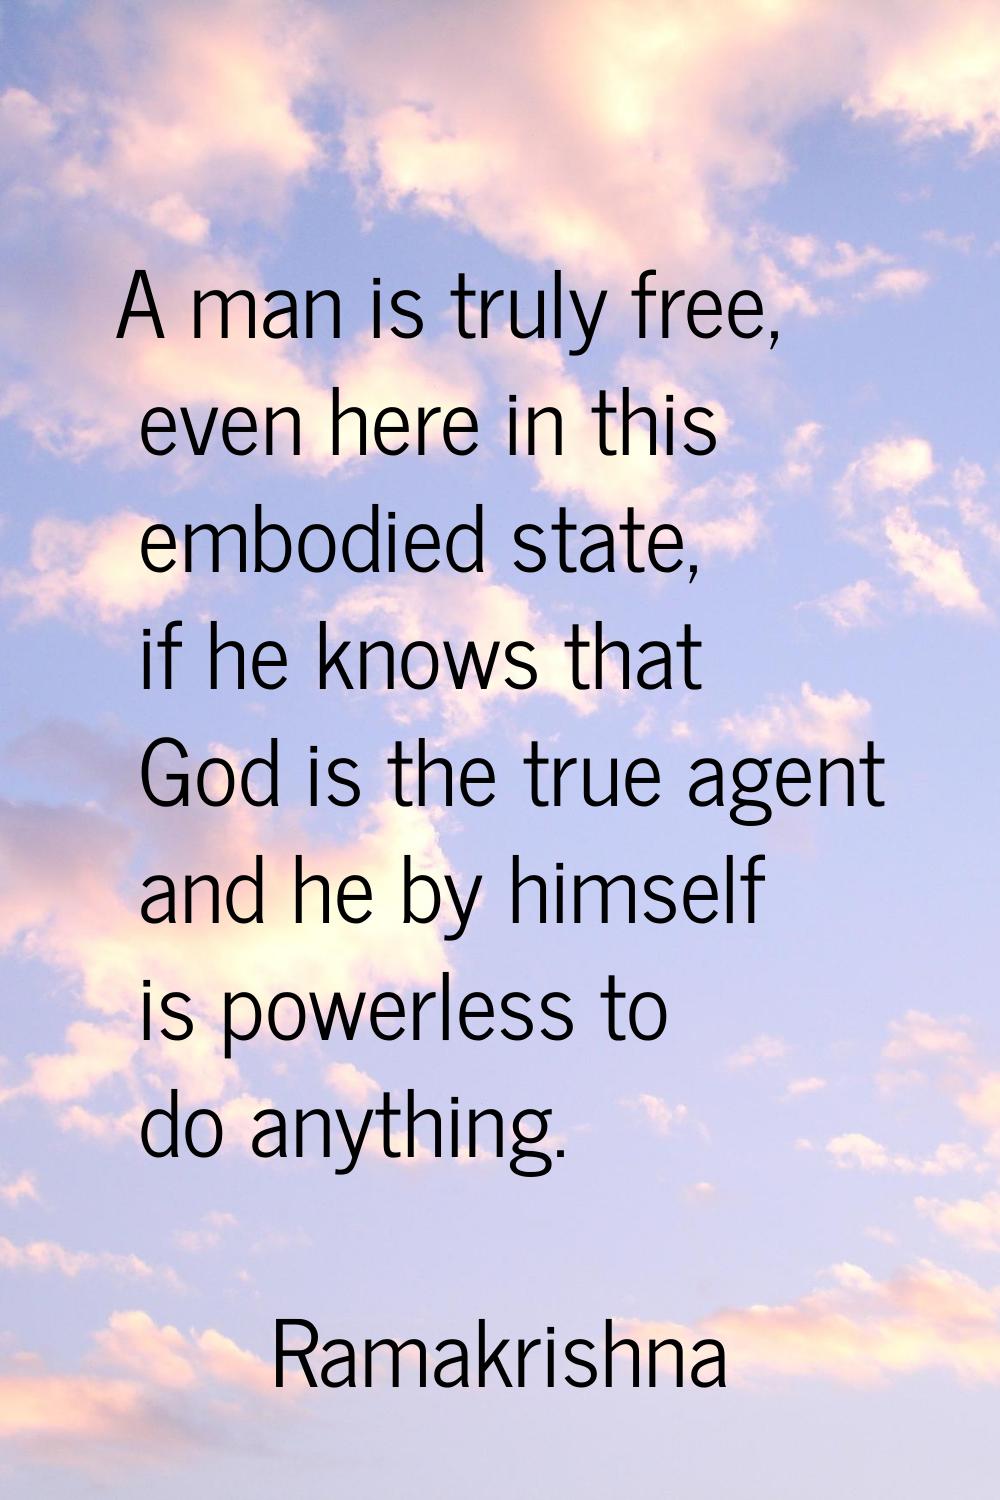 A man is truly free, even here in this embodied state, if he knows that God is the true agent and h